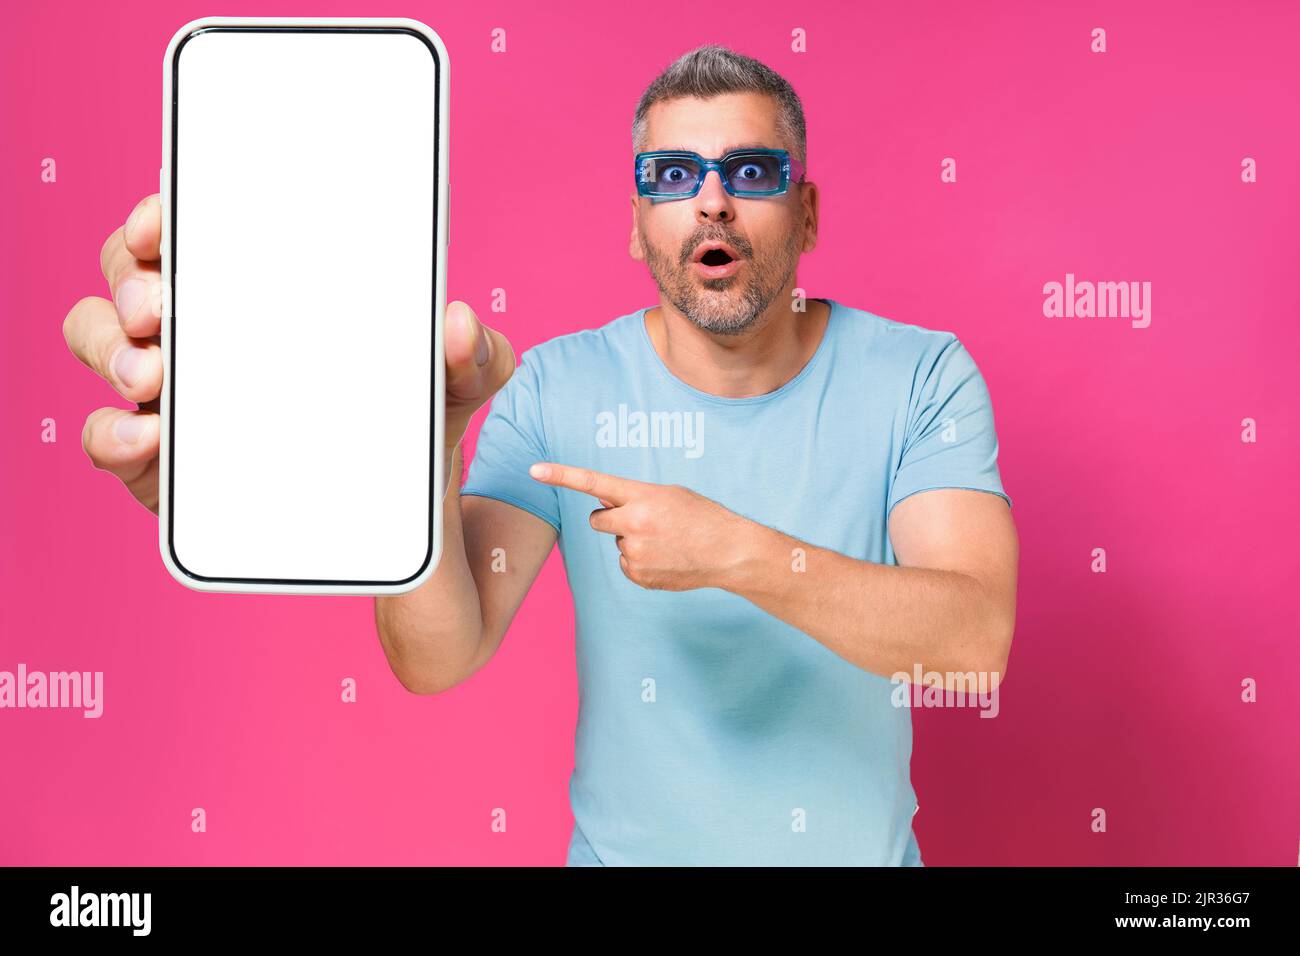 Shocked handsome man 40s pointing at big smartphone in hand wearing blue shirt and sunglasses isolated on pink background. Man with phone studio shot. Mobile app advertisement. Copy space. Stock Photo